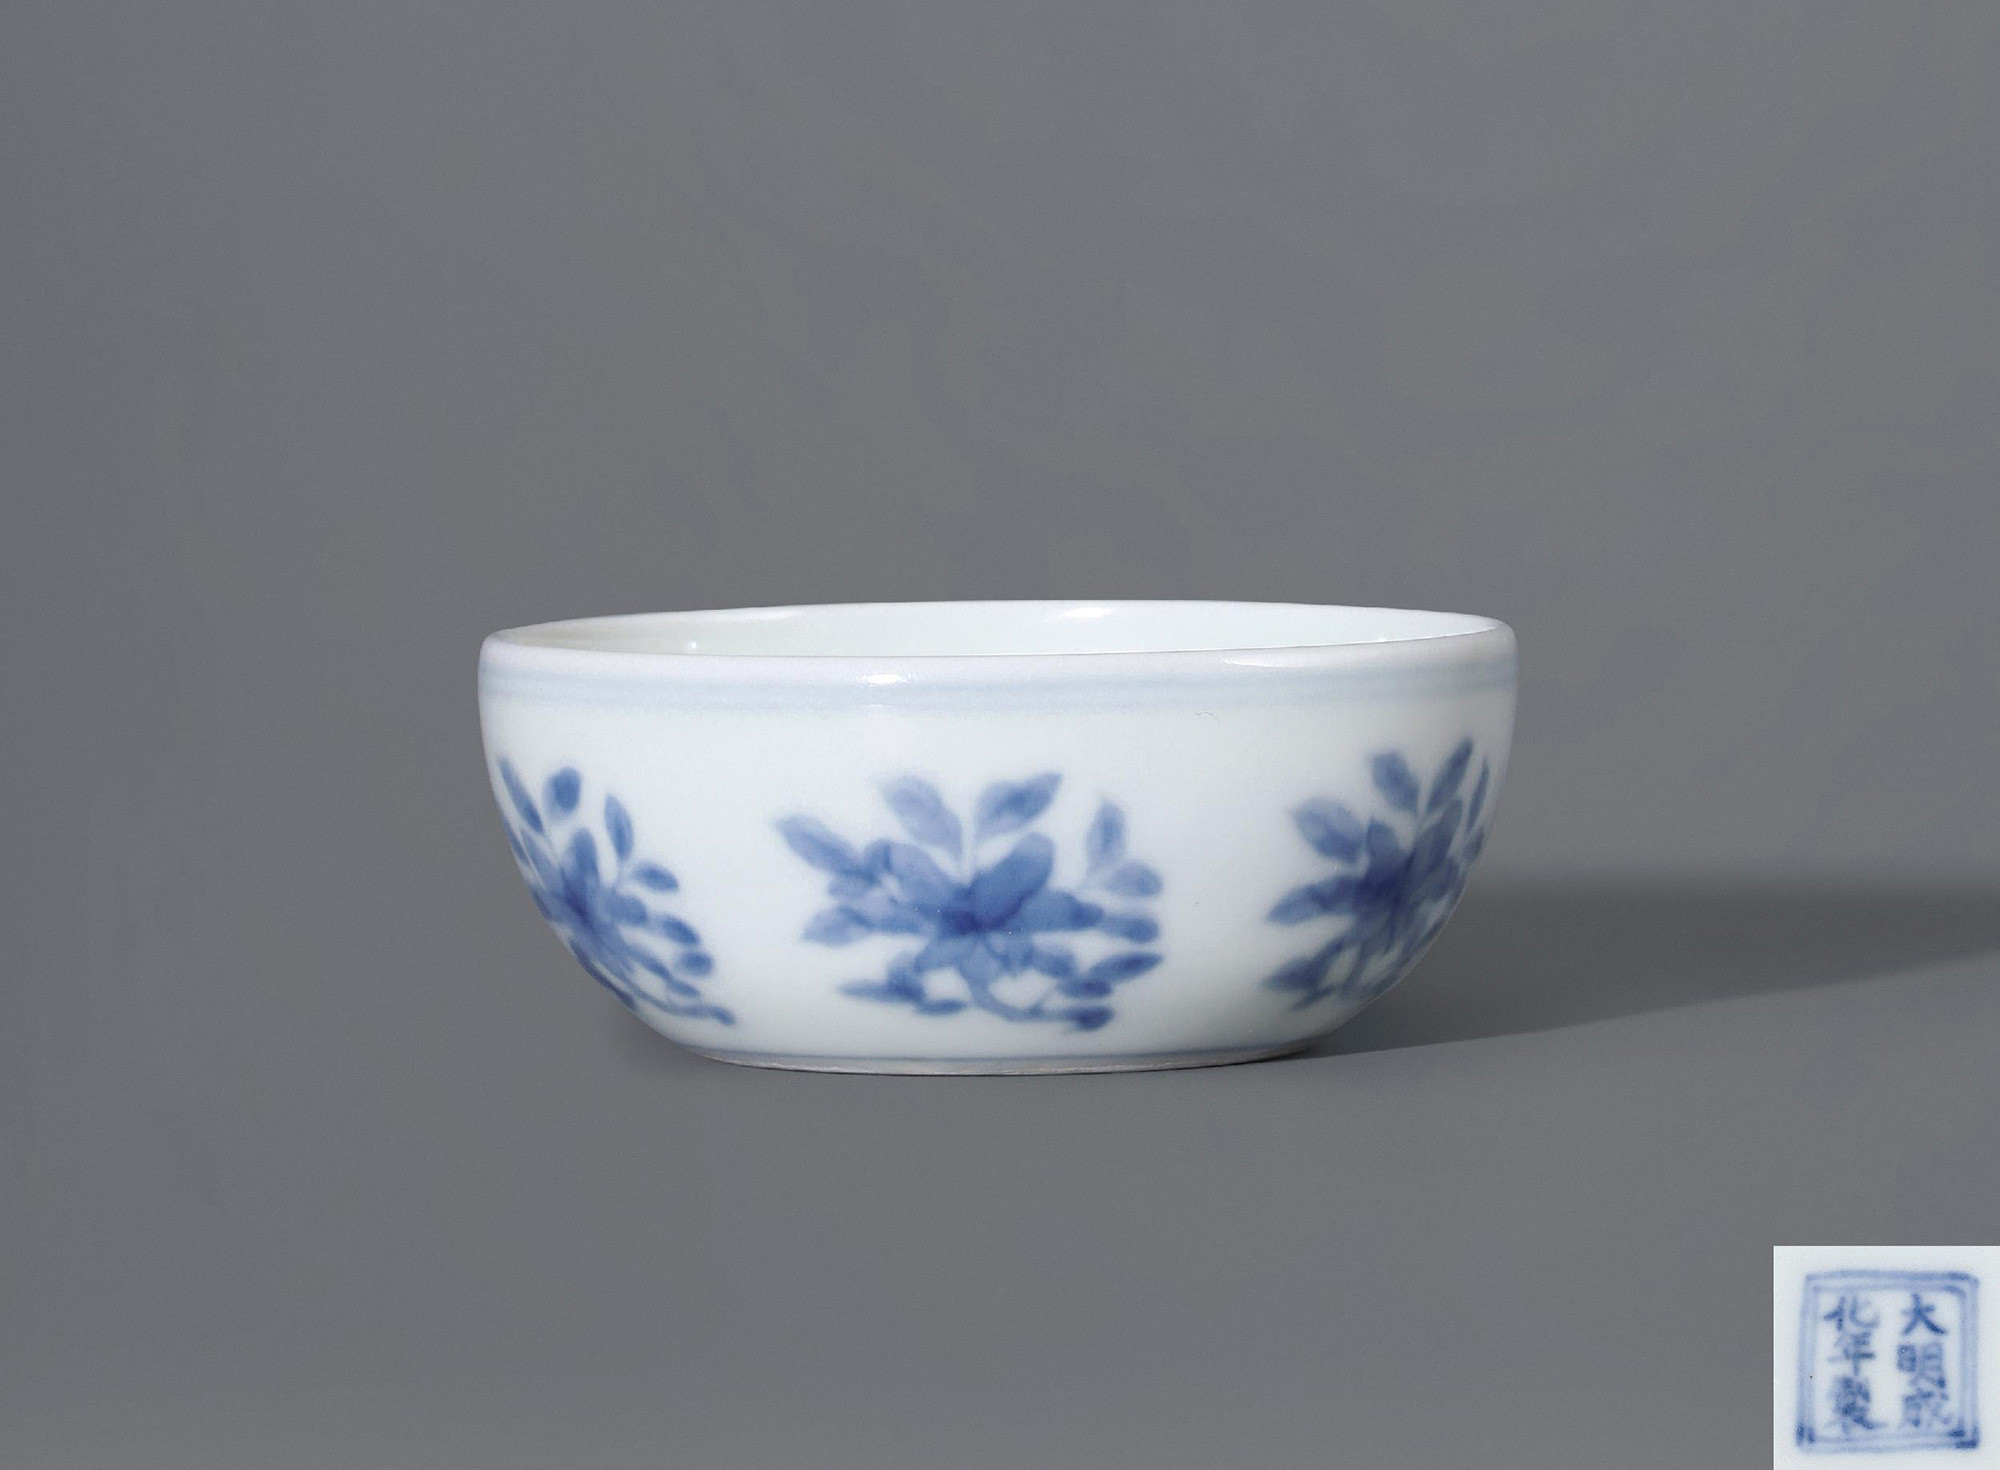 An extremely rare blue and white cup with inward foot and design of branched flowers